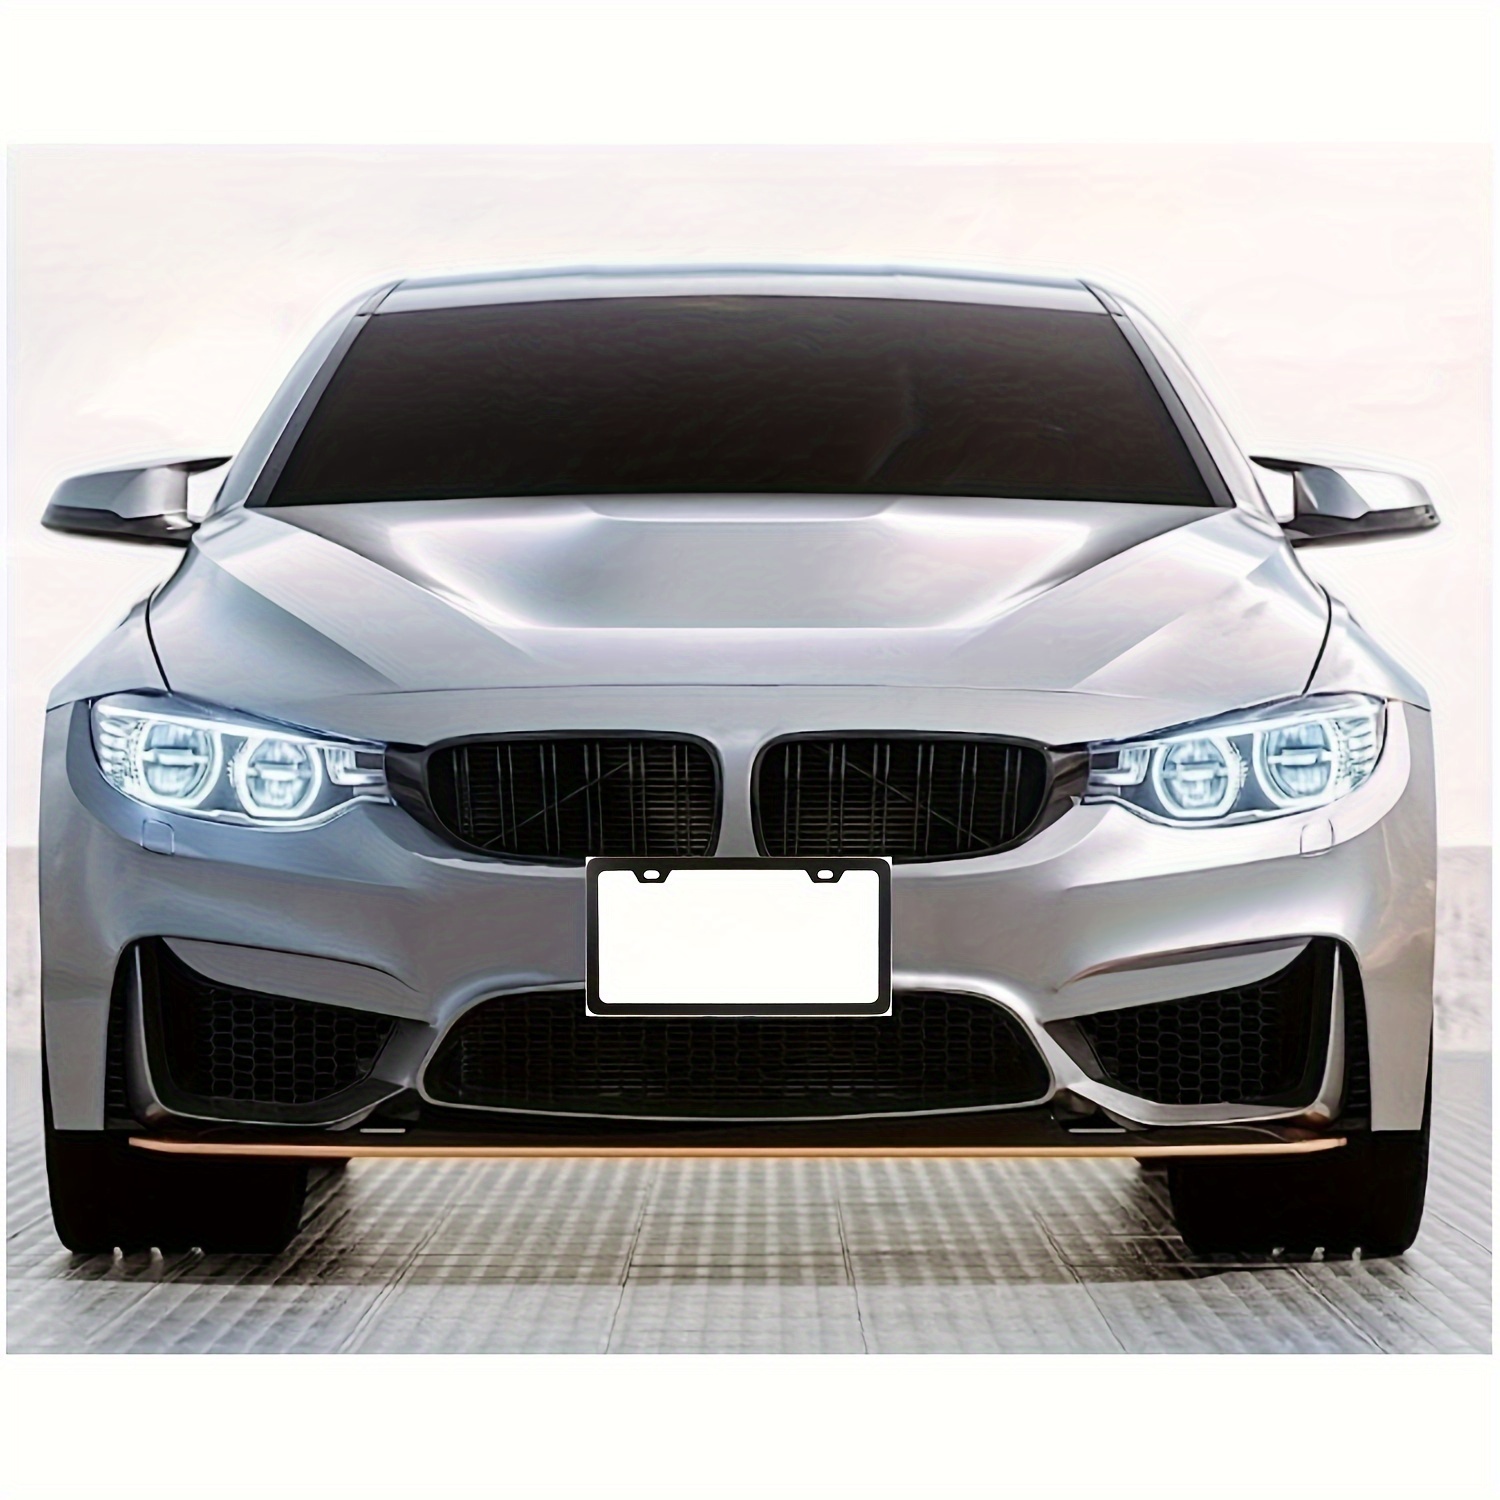 Stylish Stainless Steel Car Grill Section